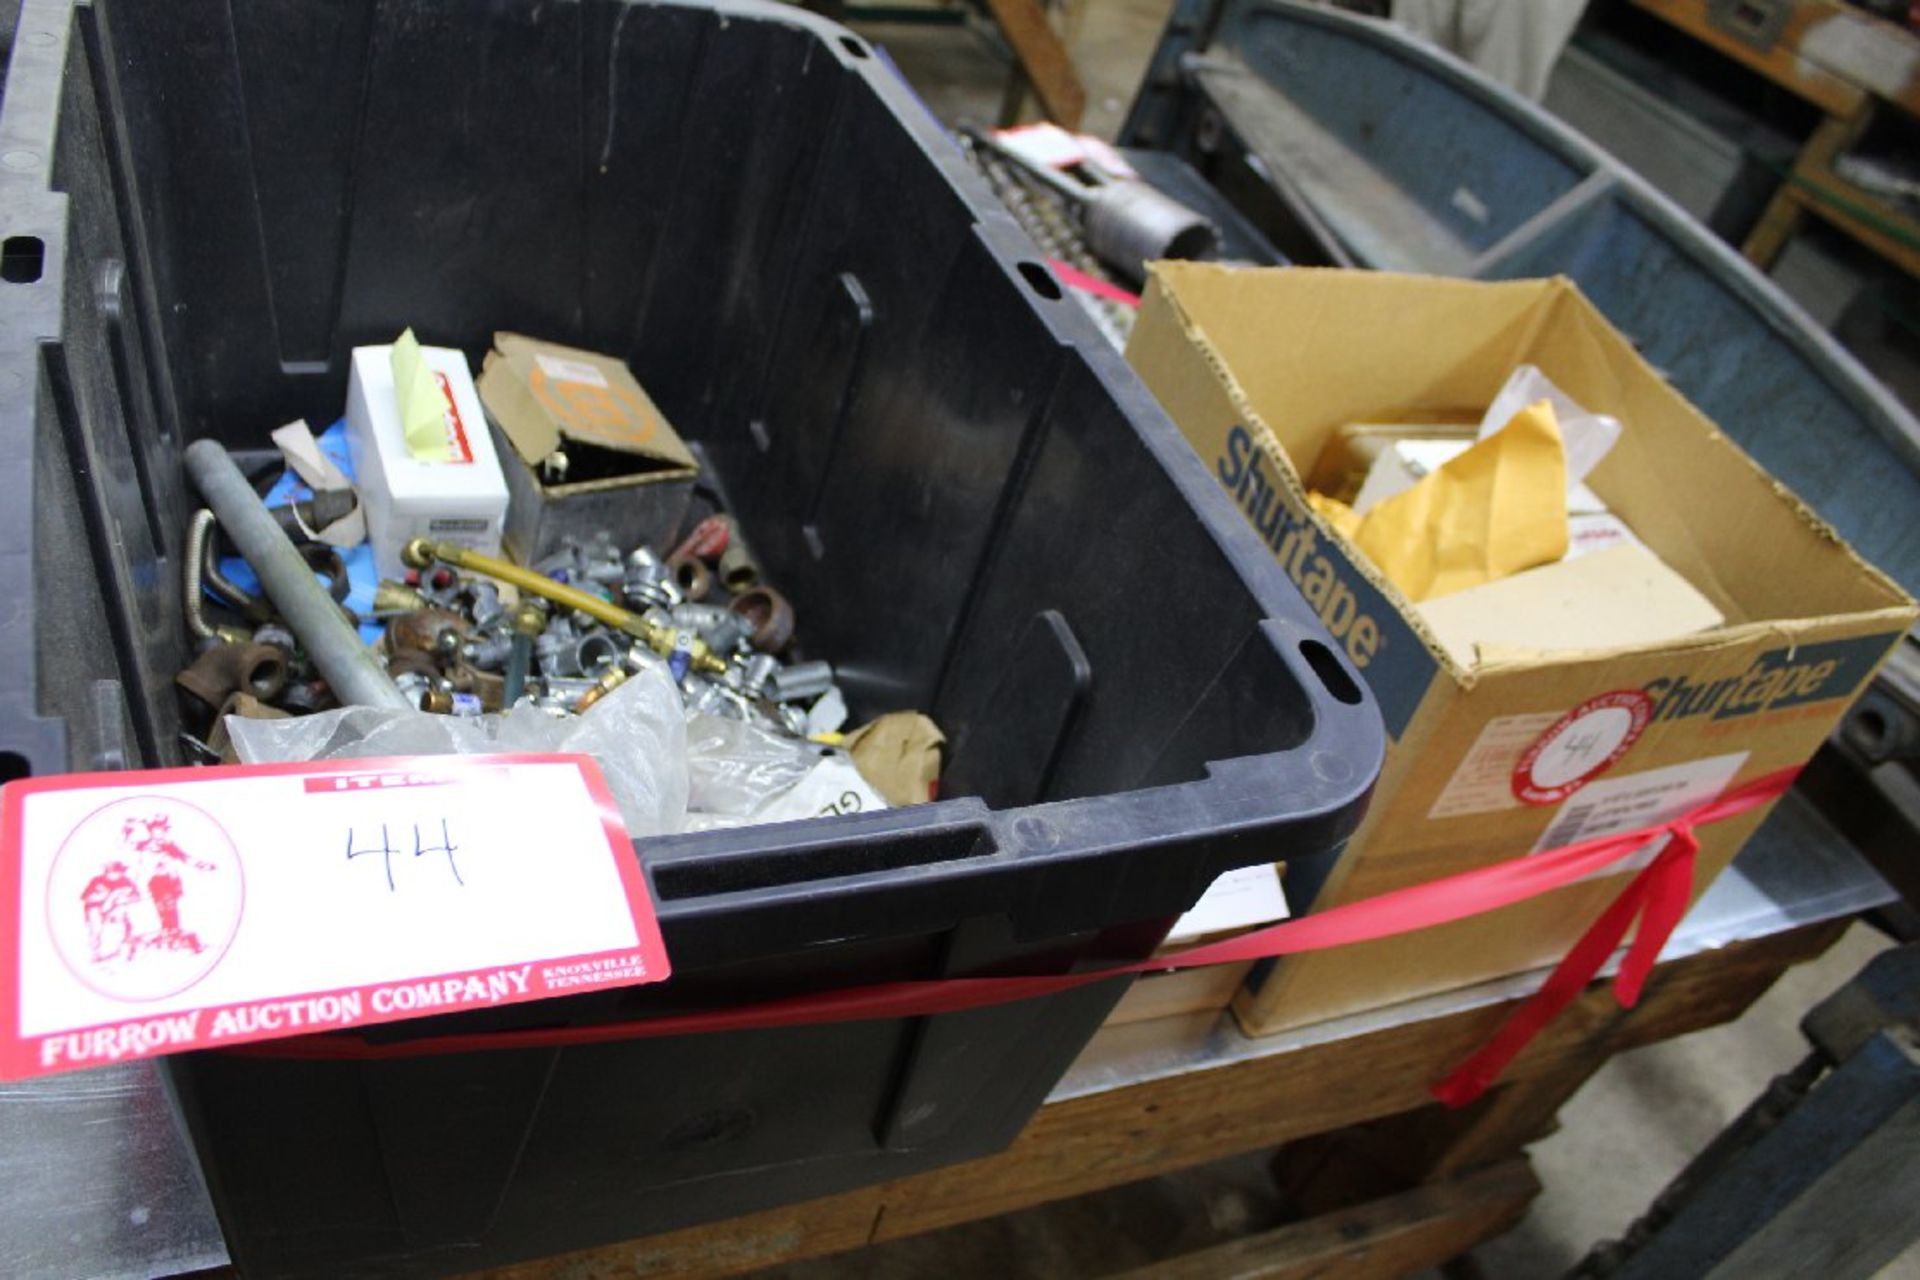 Contents of Bin &Boxes (conduit fittings, pipe fittings, igniters, various A/C parts, etc.)